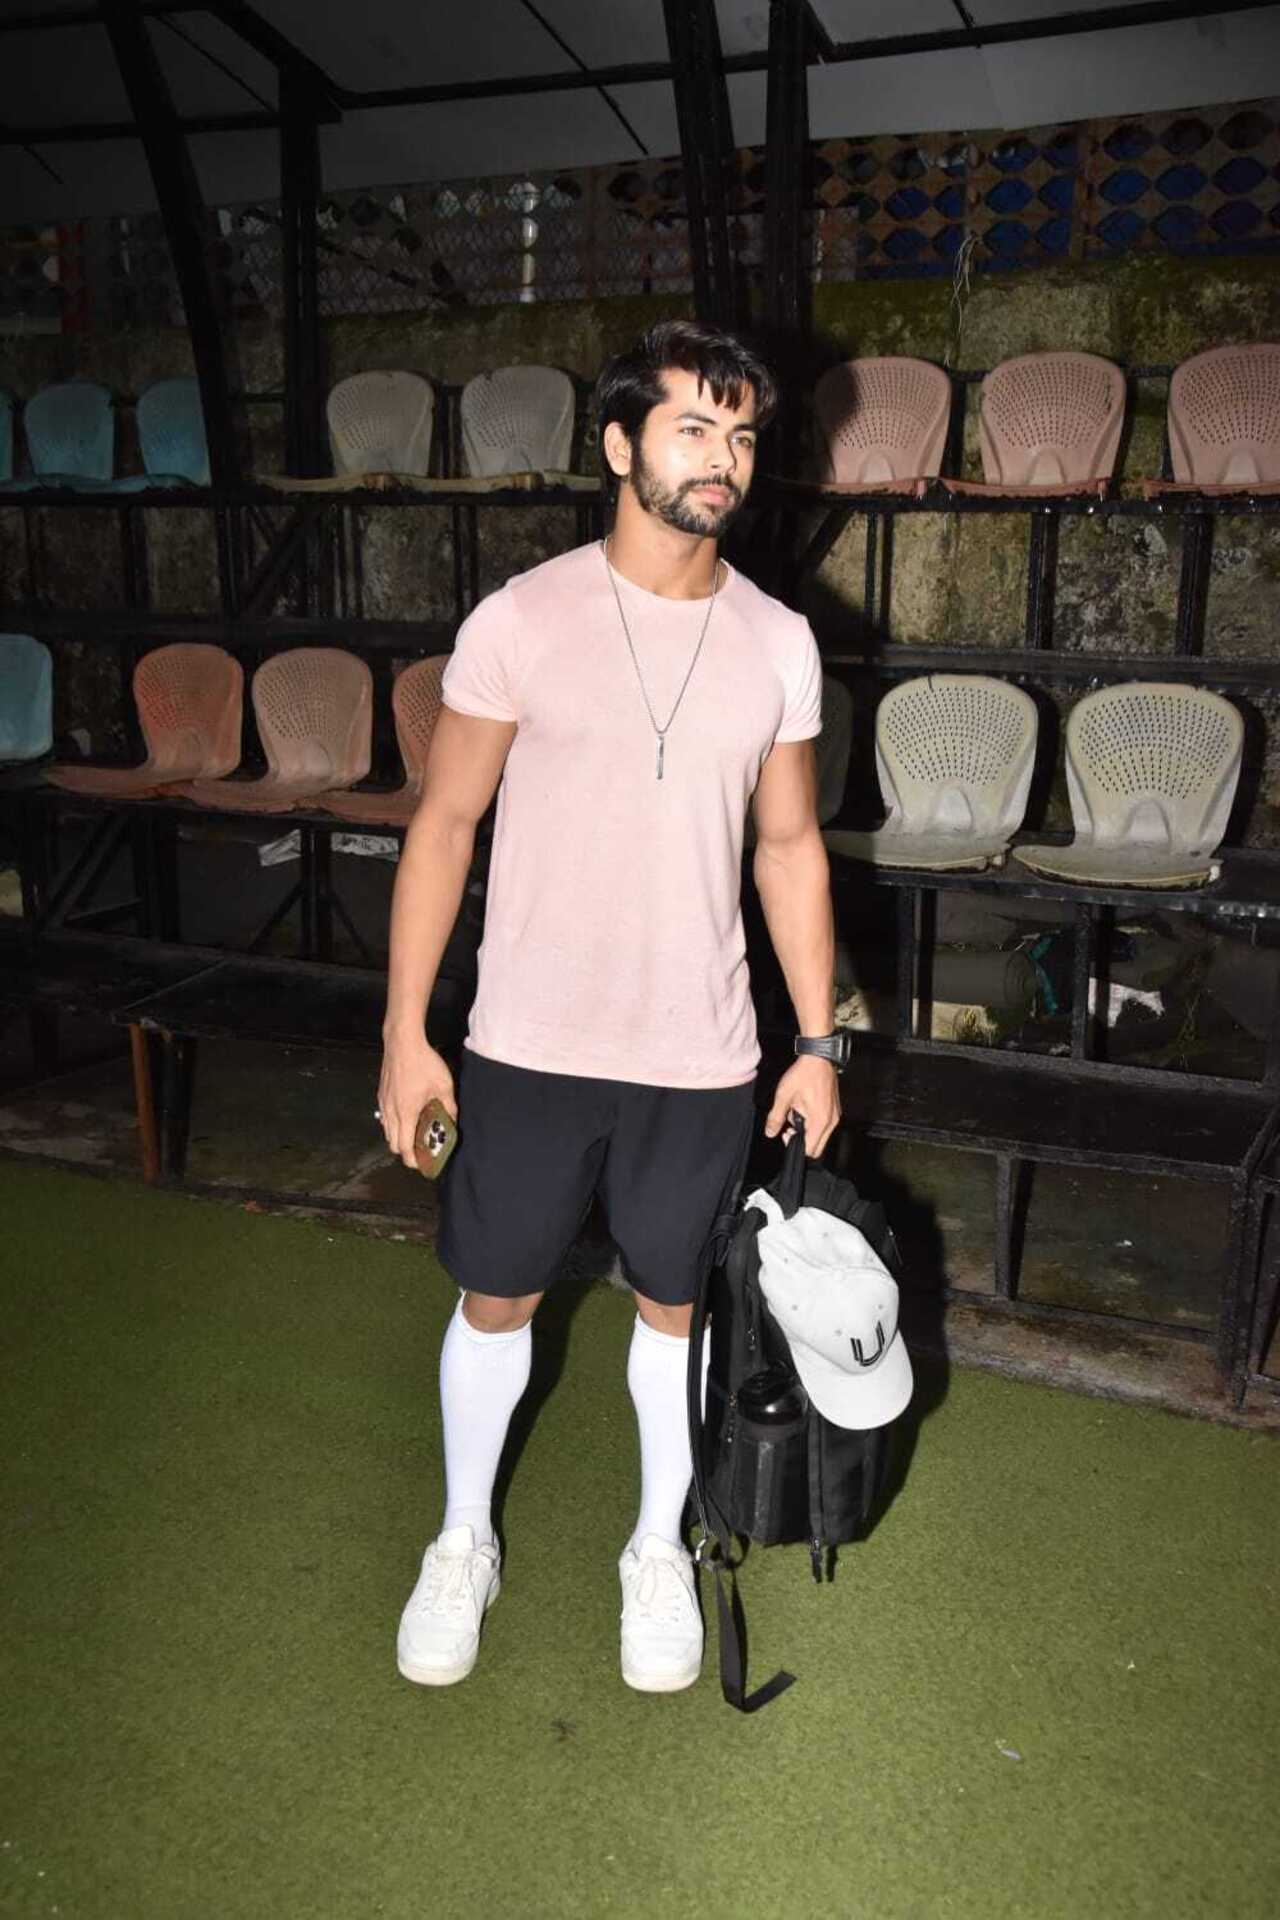 Siddharth Nigam was snapped as he went for a football practice session